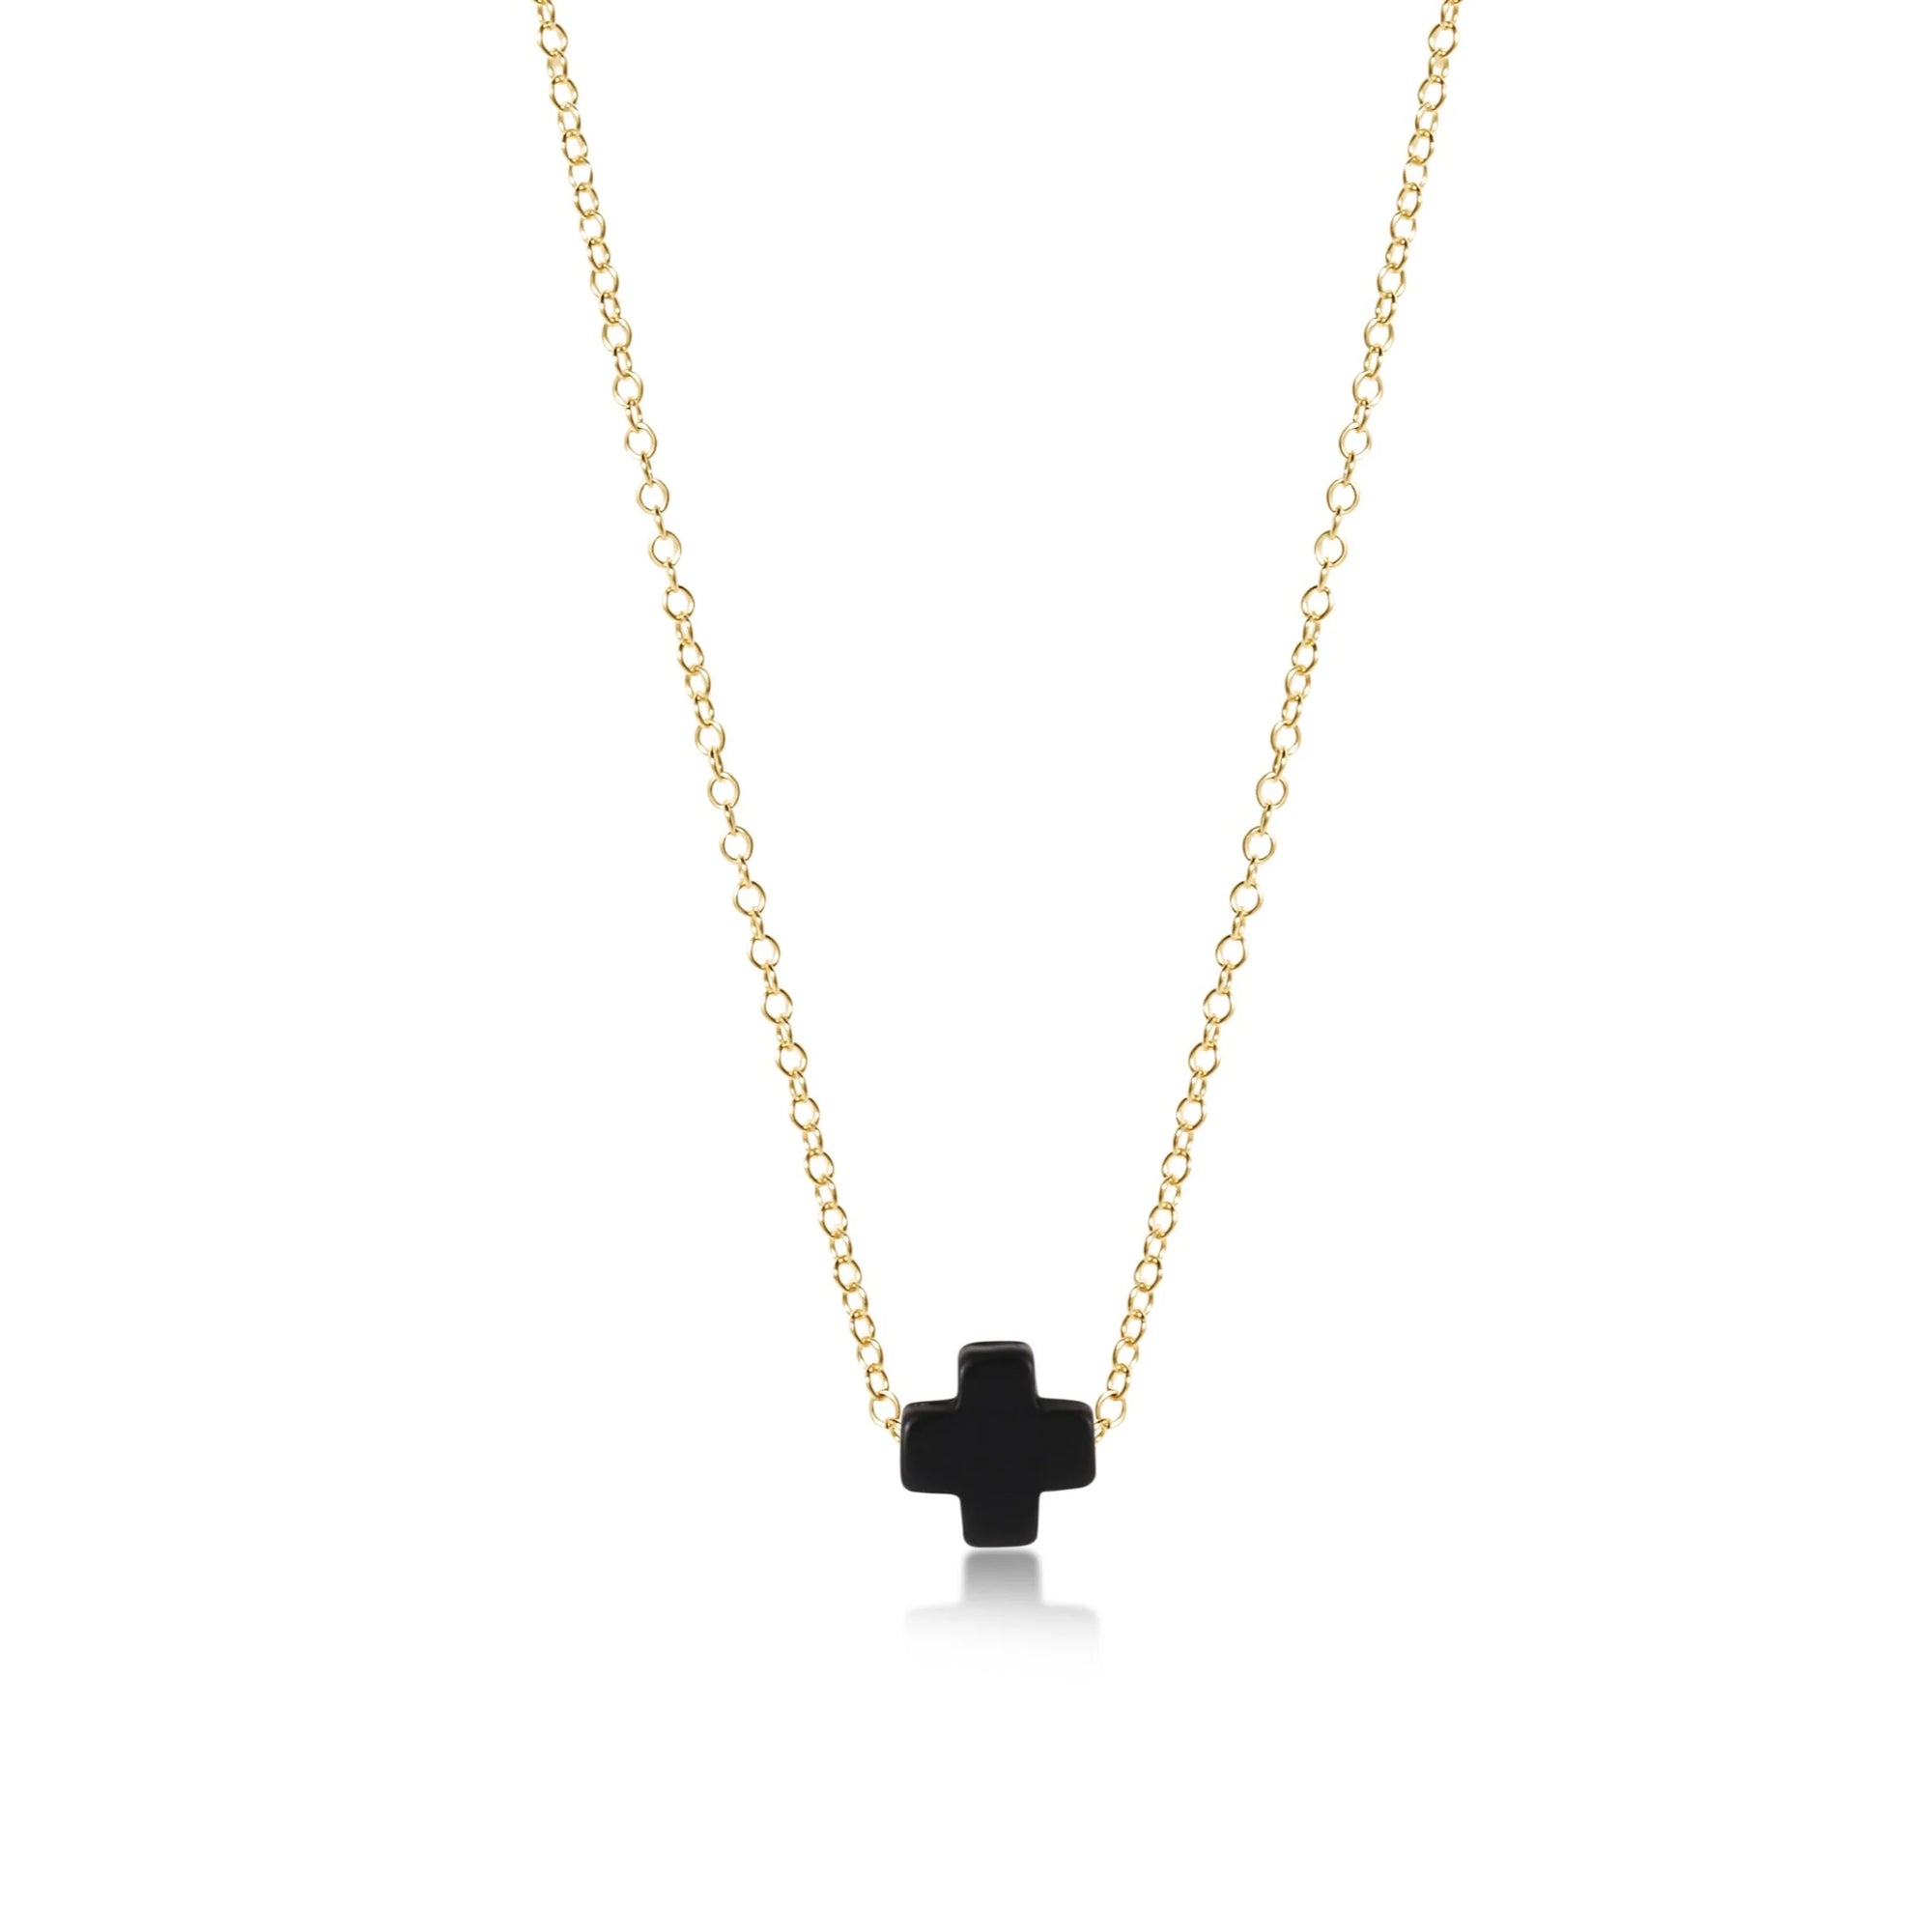 16" Gold Necklace - Onyx Signature Cross